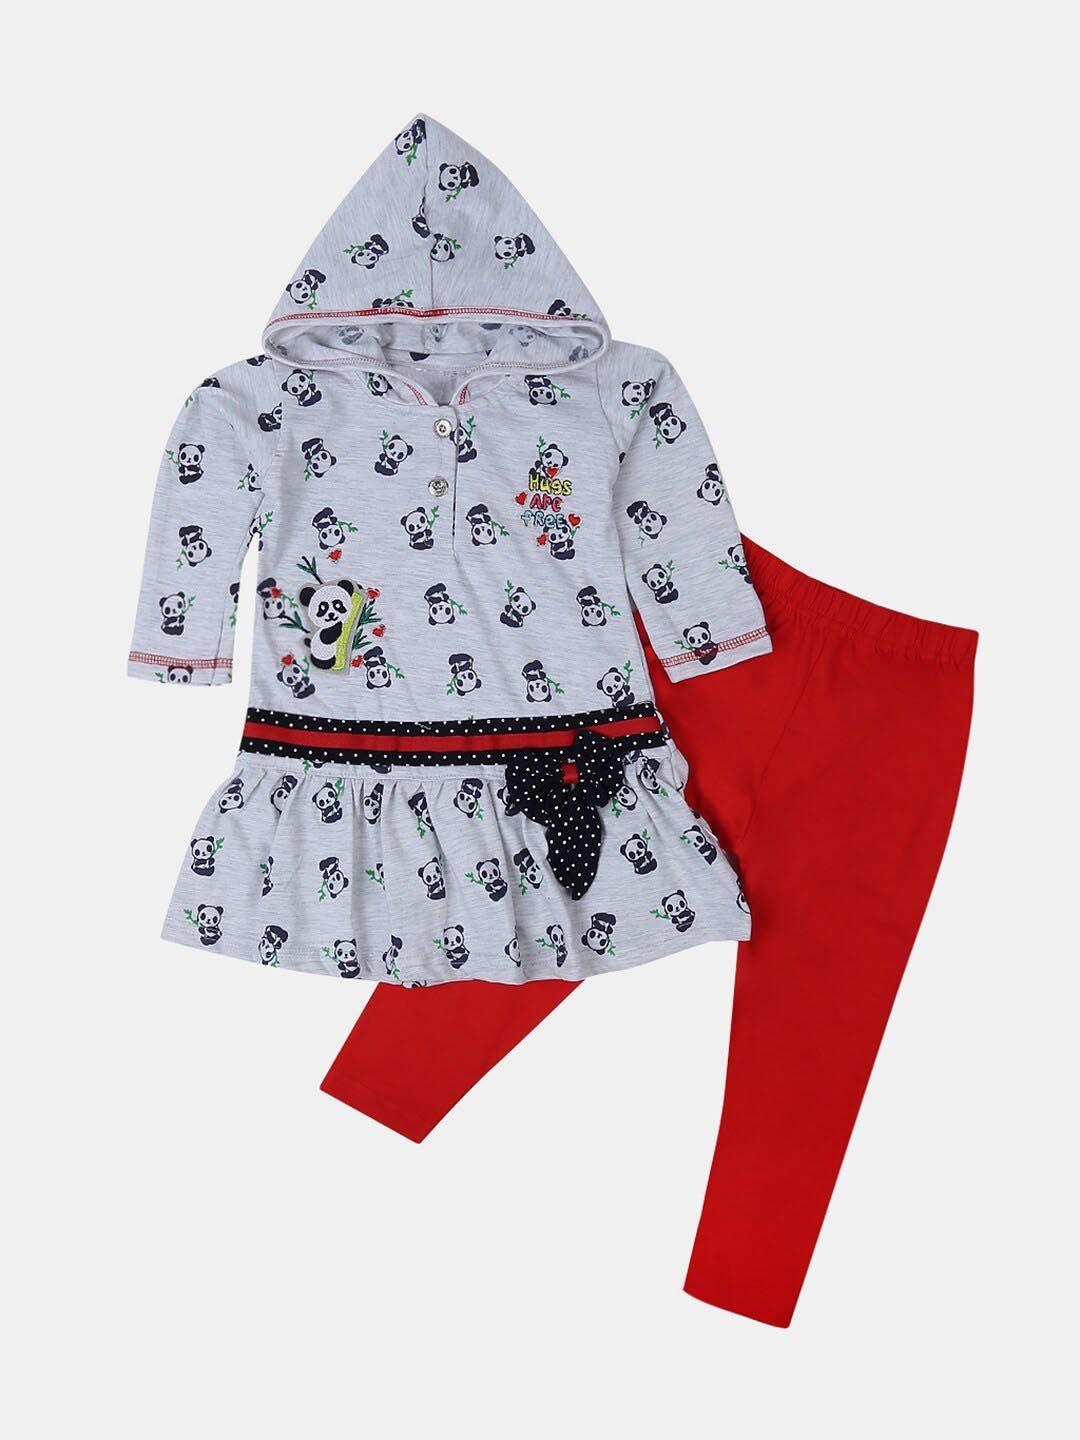 v-mart kids printed pure cotton top with leggings